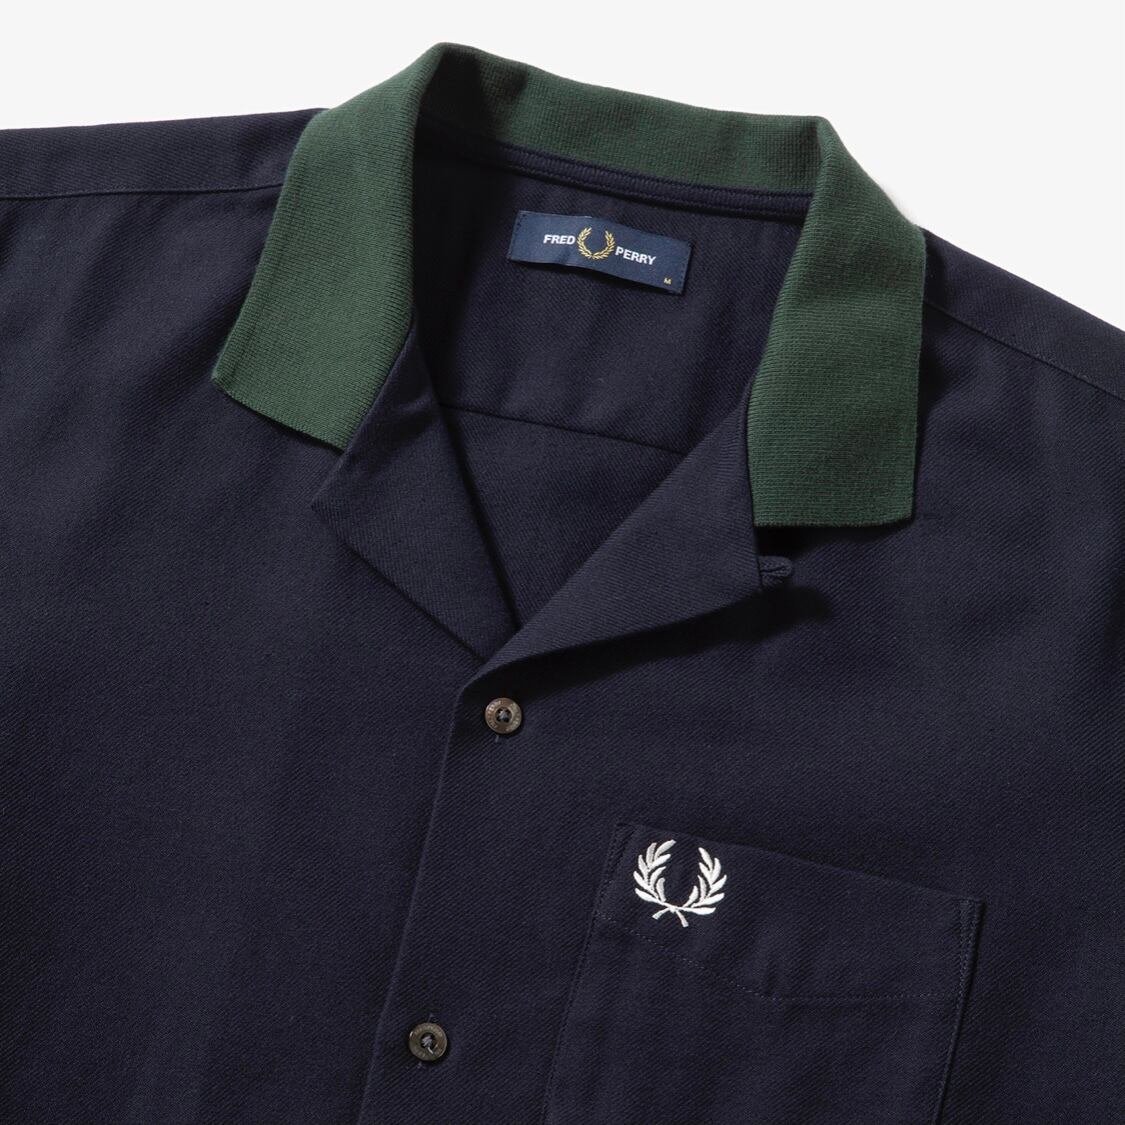 FRED PERRY : Ribbed Collar Revere Shirt